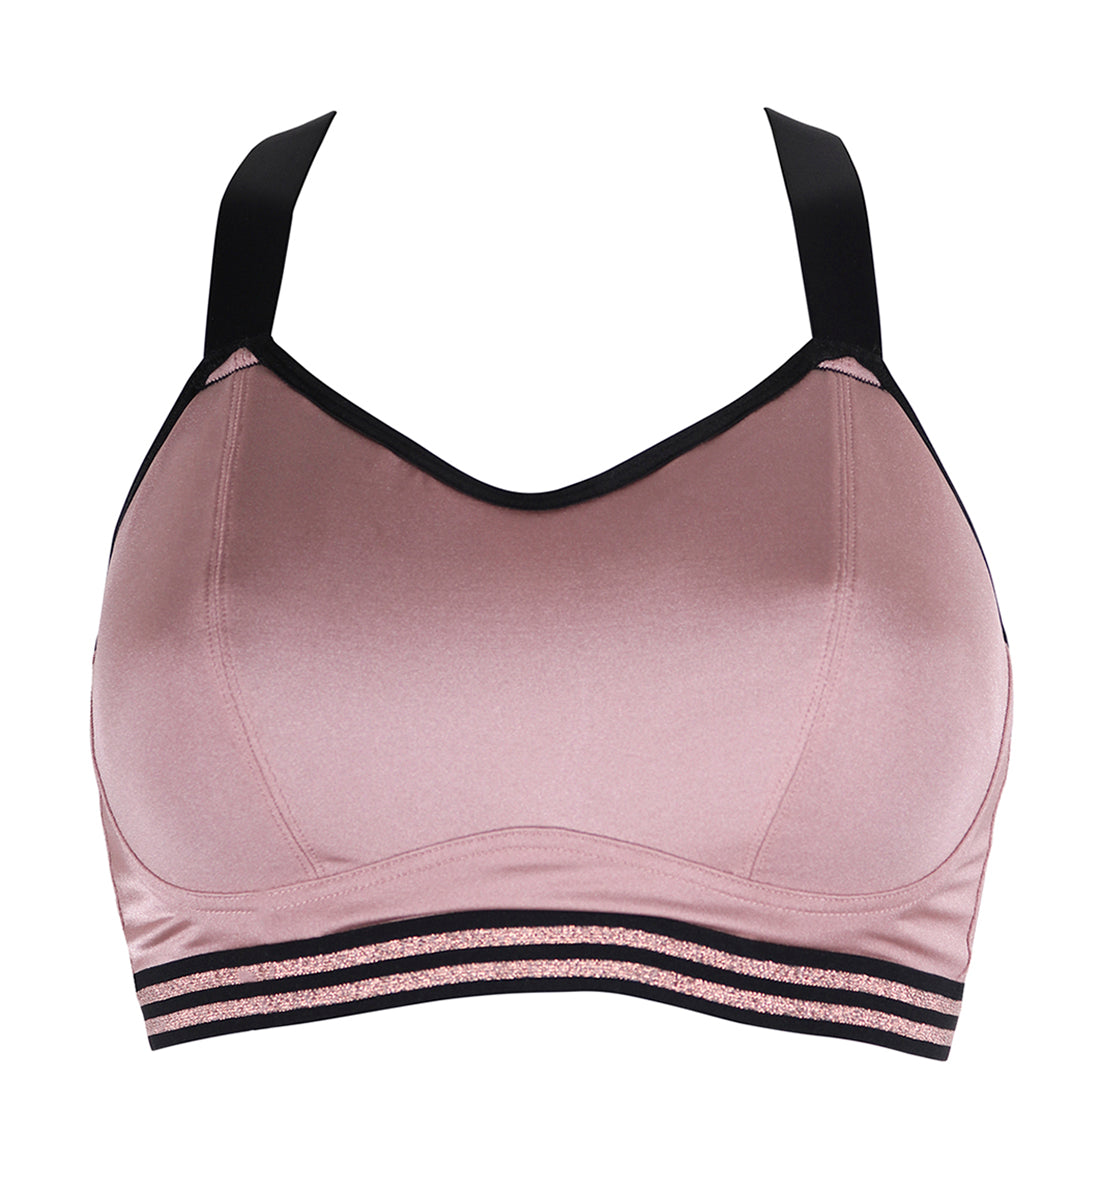 Pour Moi Energy Empower Underwire Light Padded Convertible Sports Bra (97003),32C,Rose Gold - Rose Gold,32C